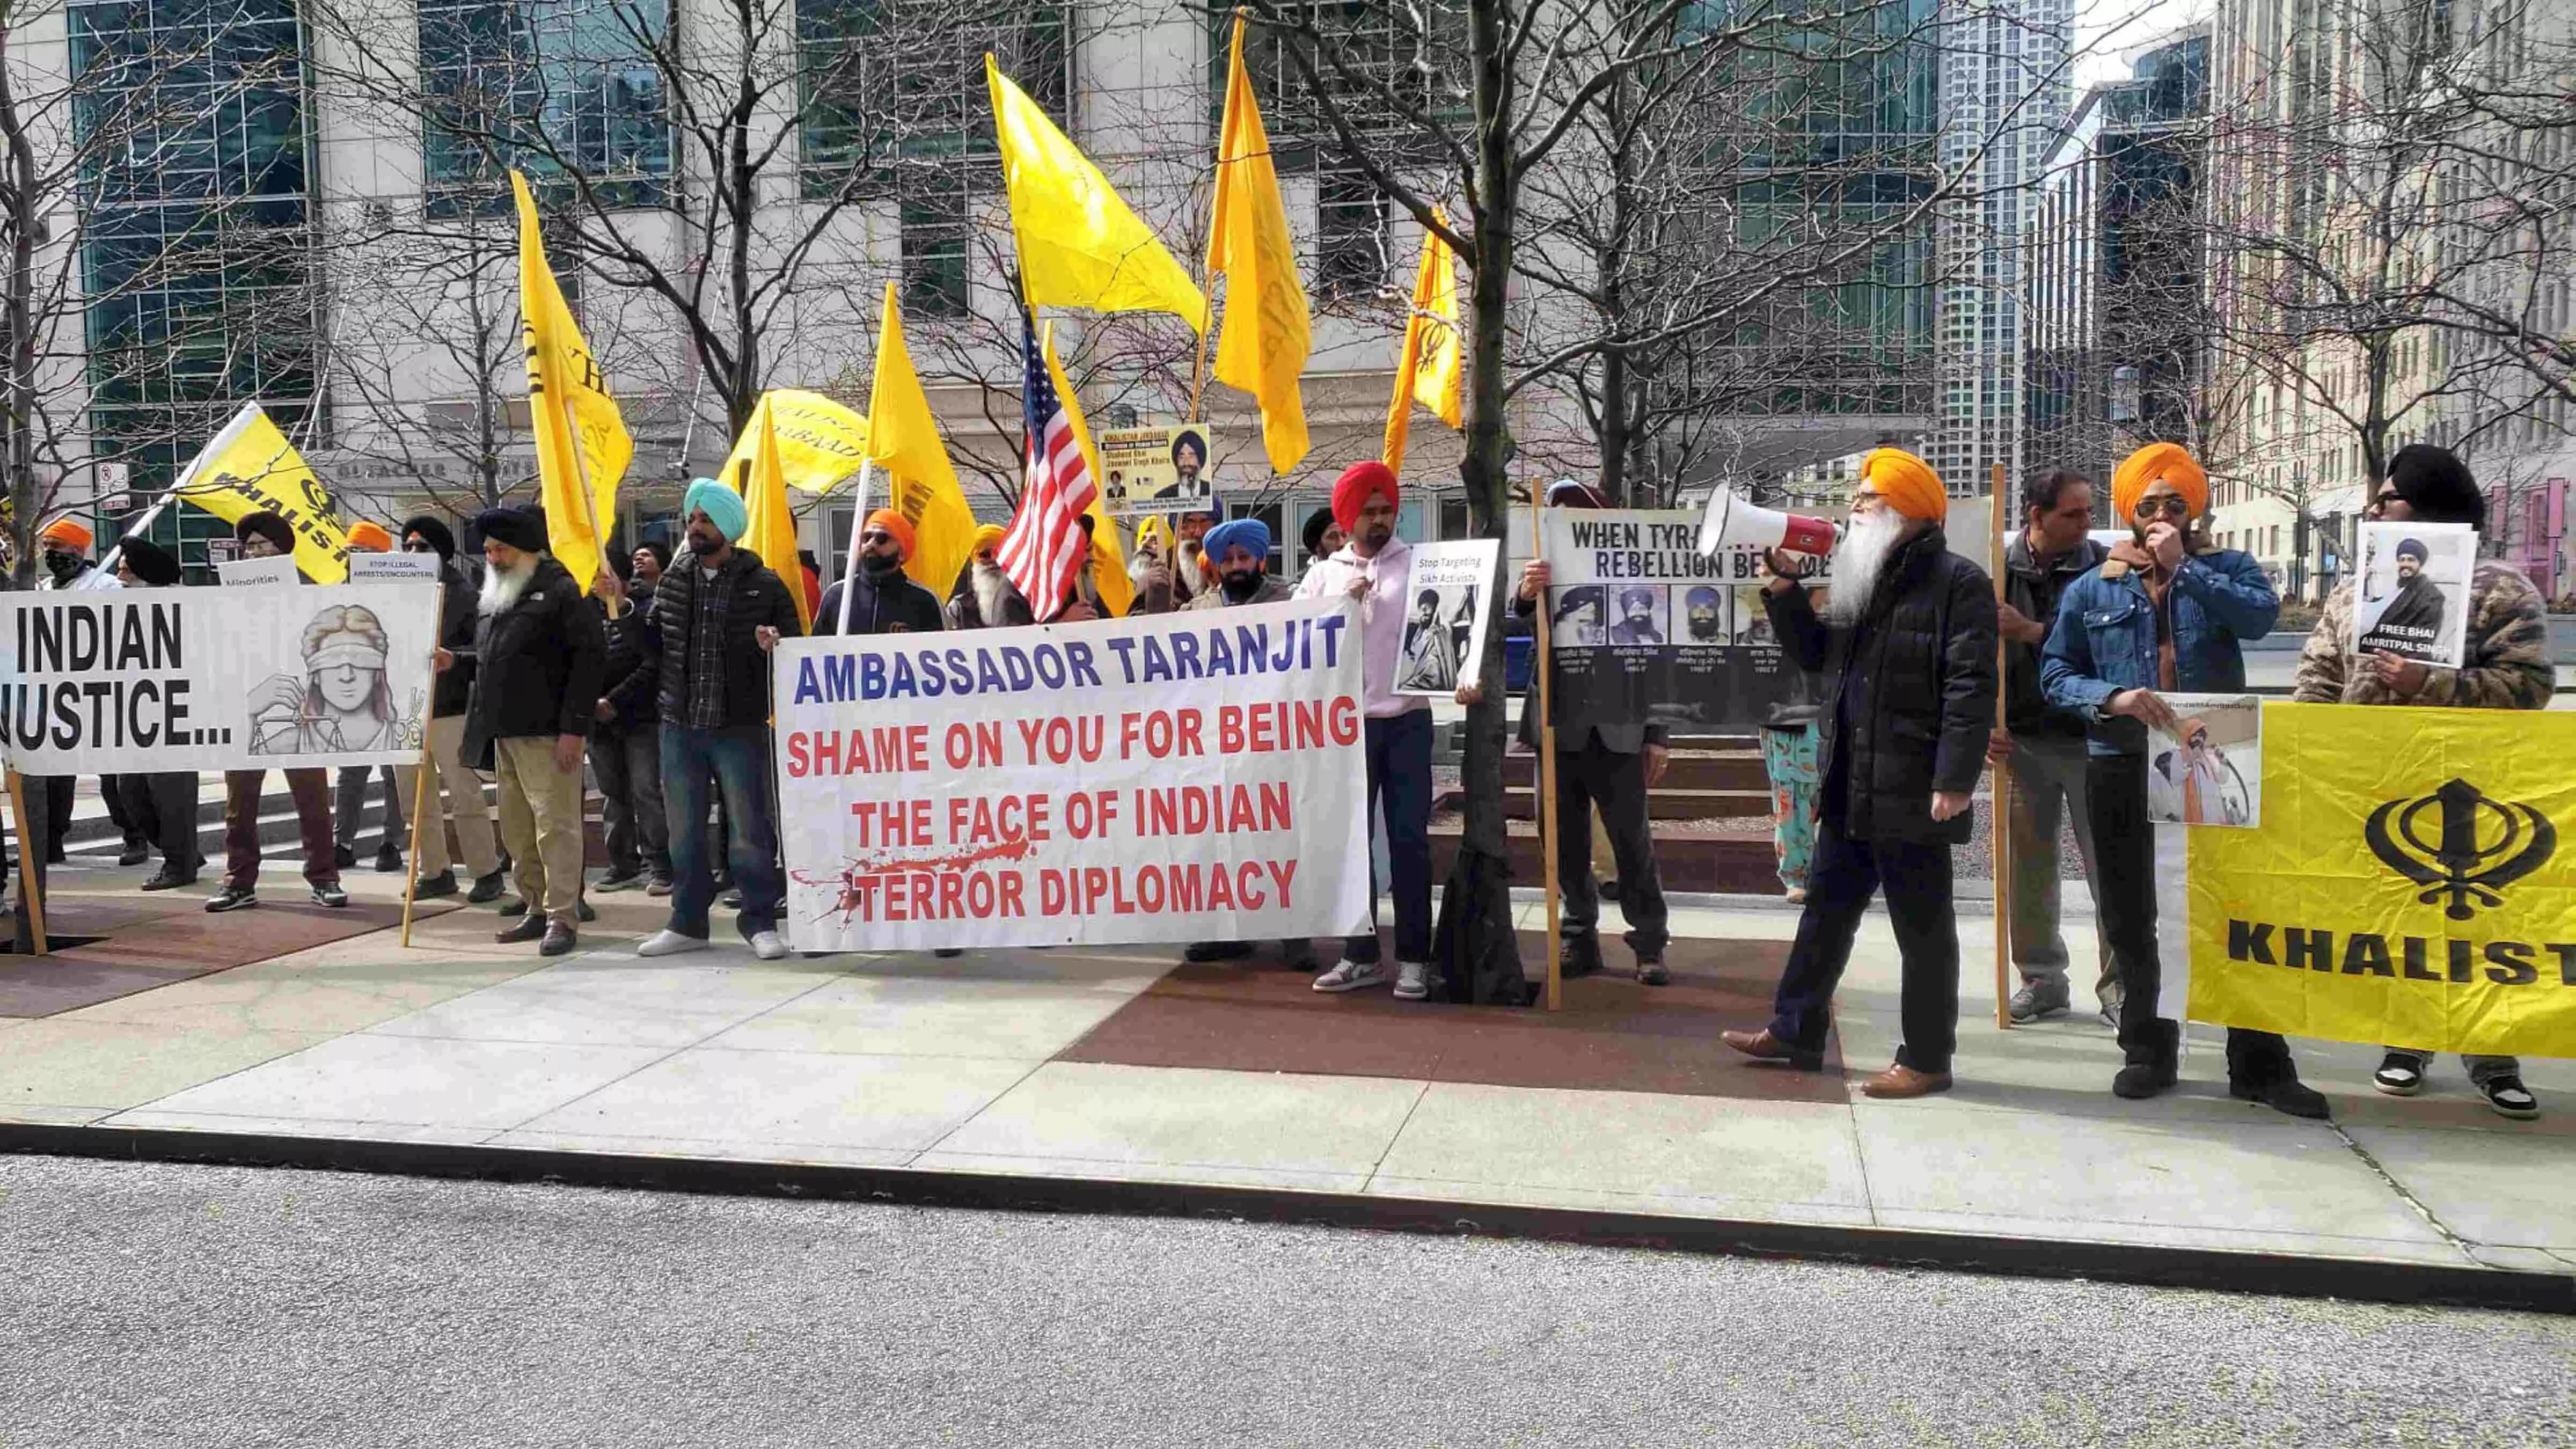 Khalistan supporters try to incite violence at Indian Embassy in Washington; Secret Service, police foil their bid